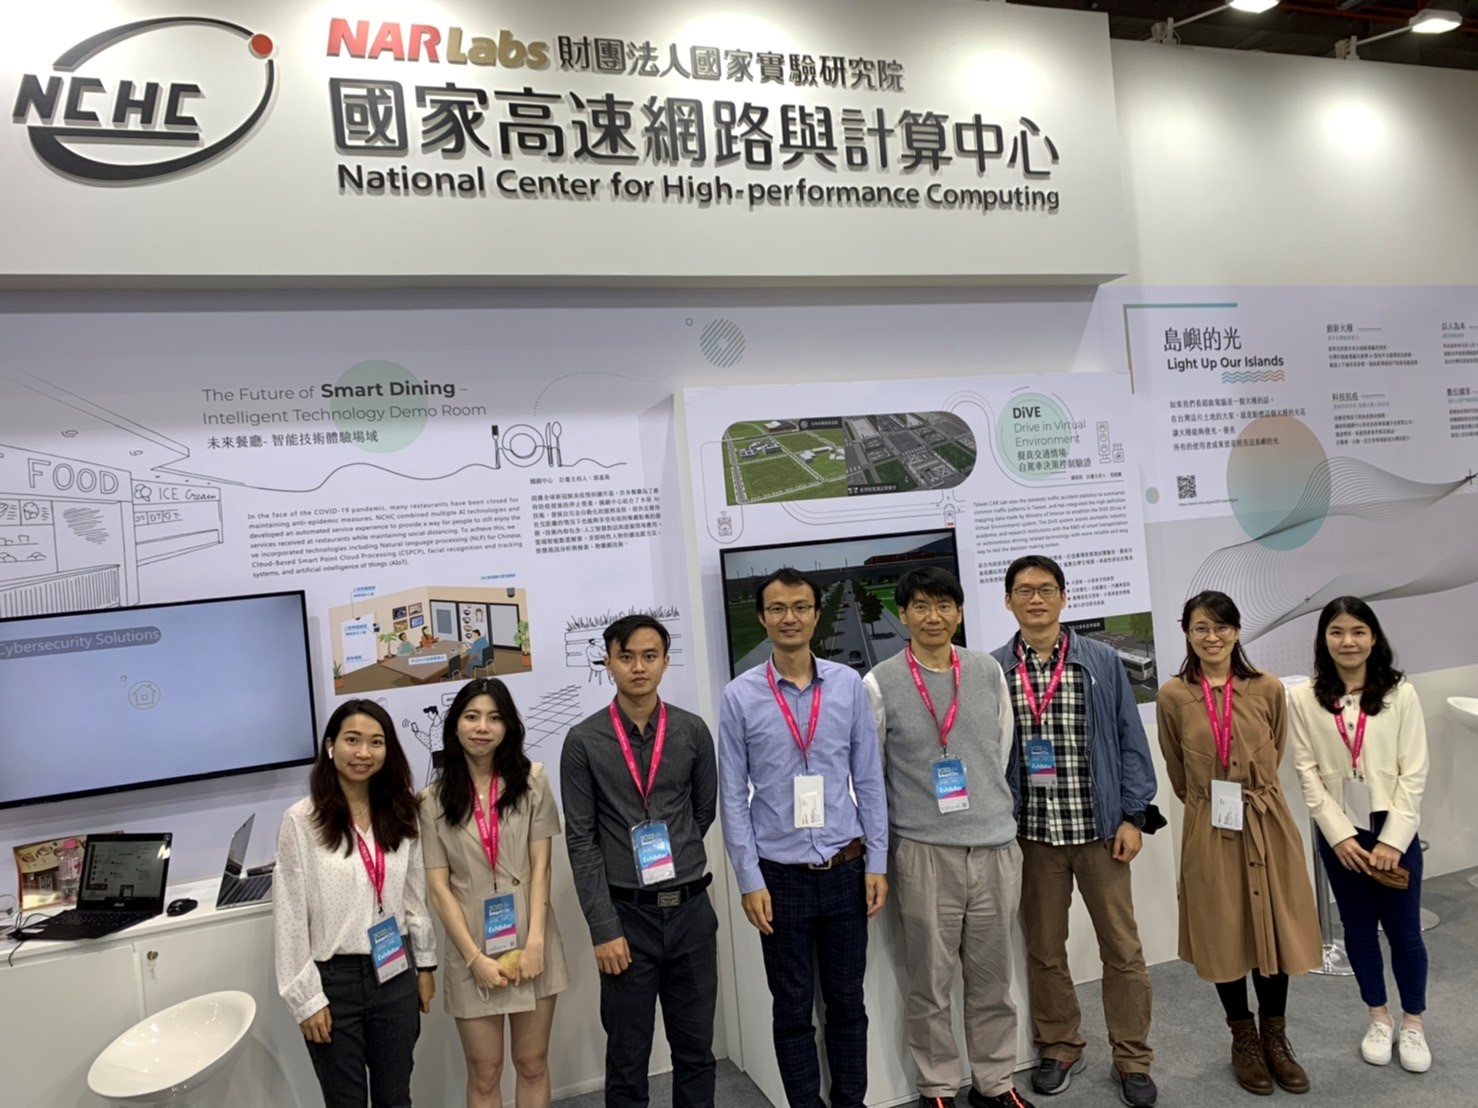 Group photo of participating staff of NCHC at the exhibition booth